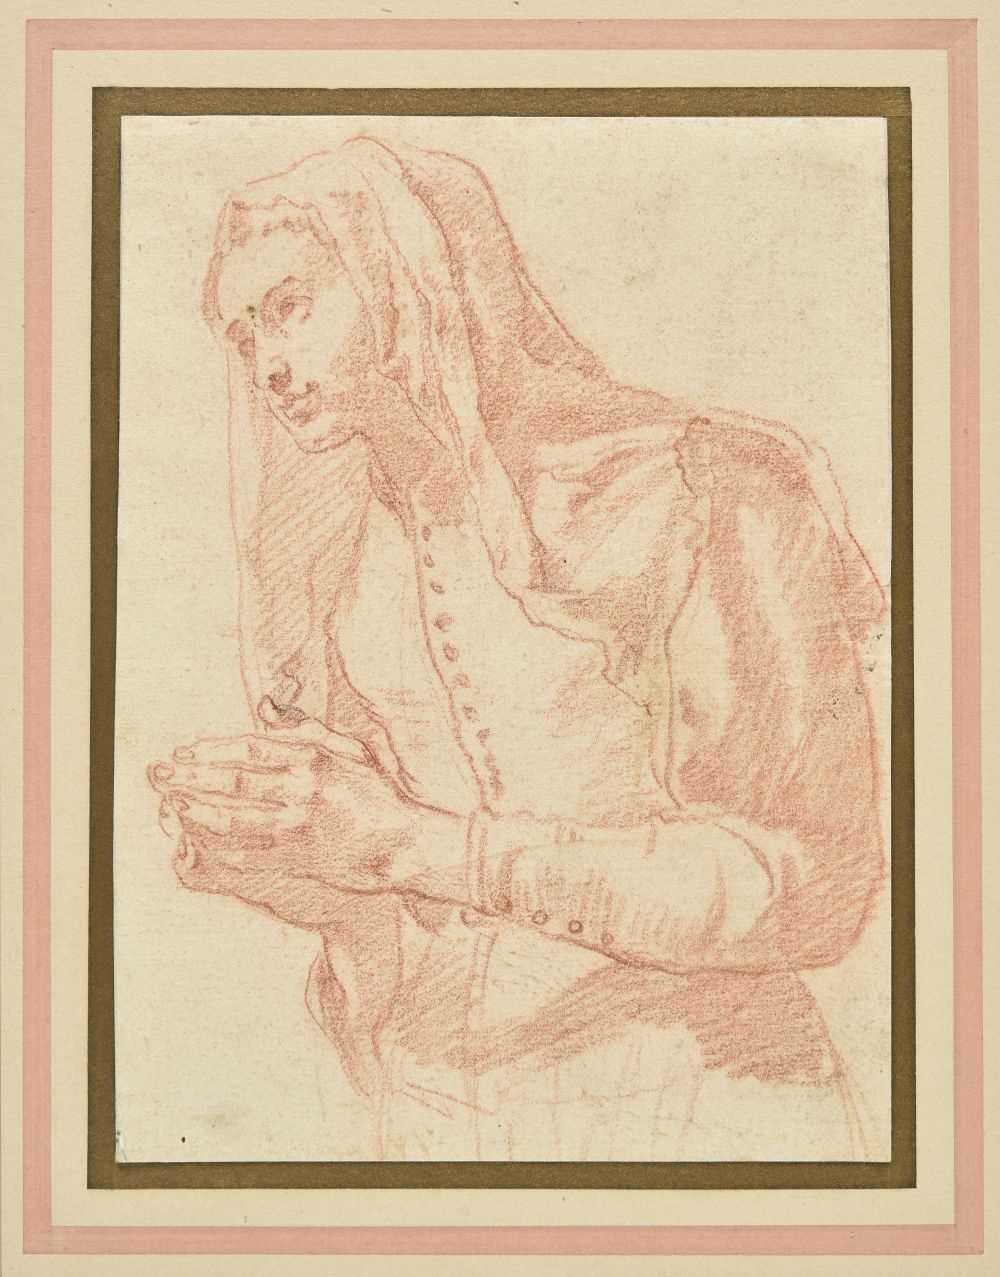 Lot 227 - Attributed to Matteo Rosselli (1578 - 1650). Study of a Young Woman in Prayer